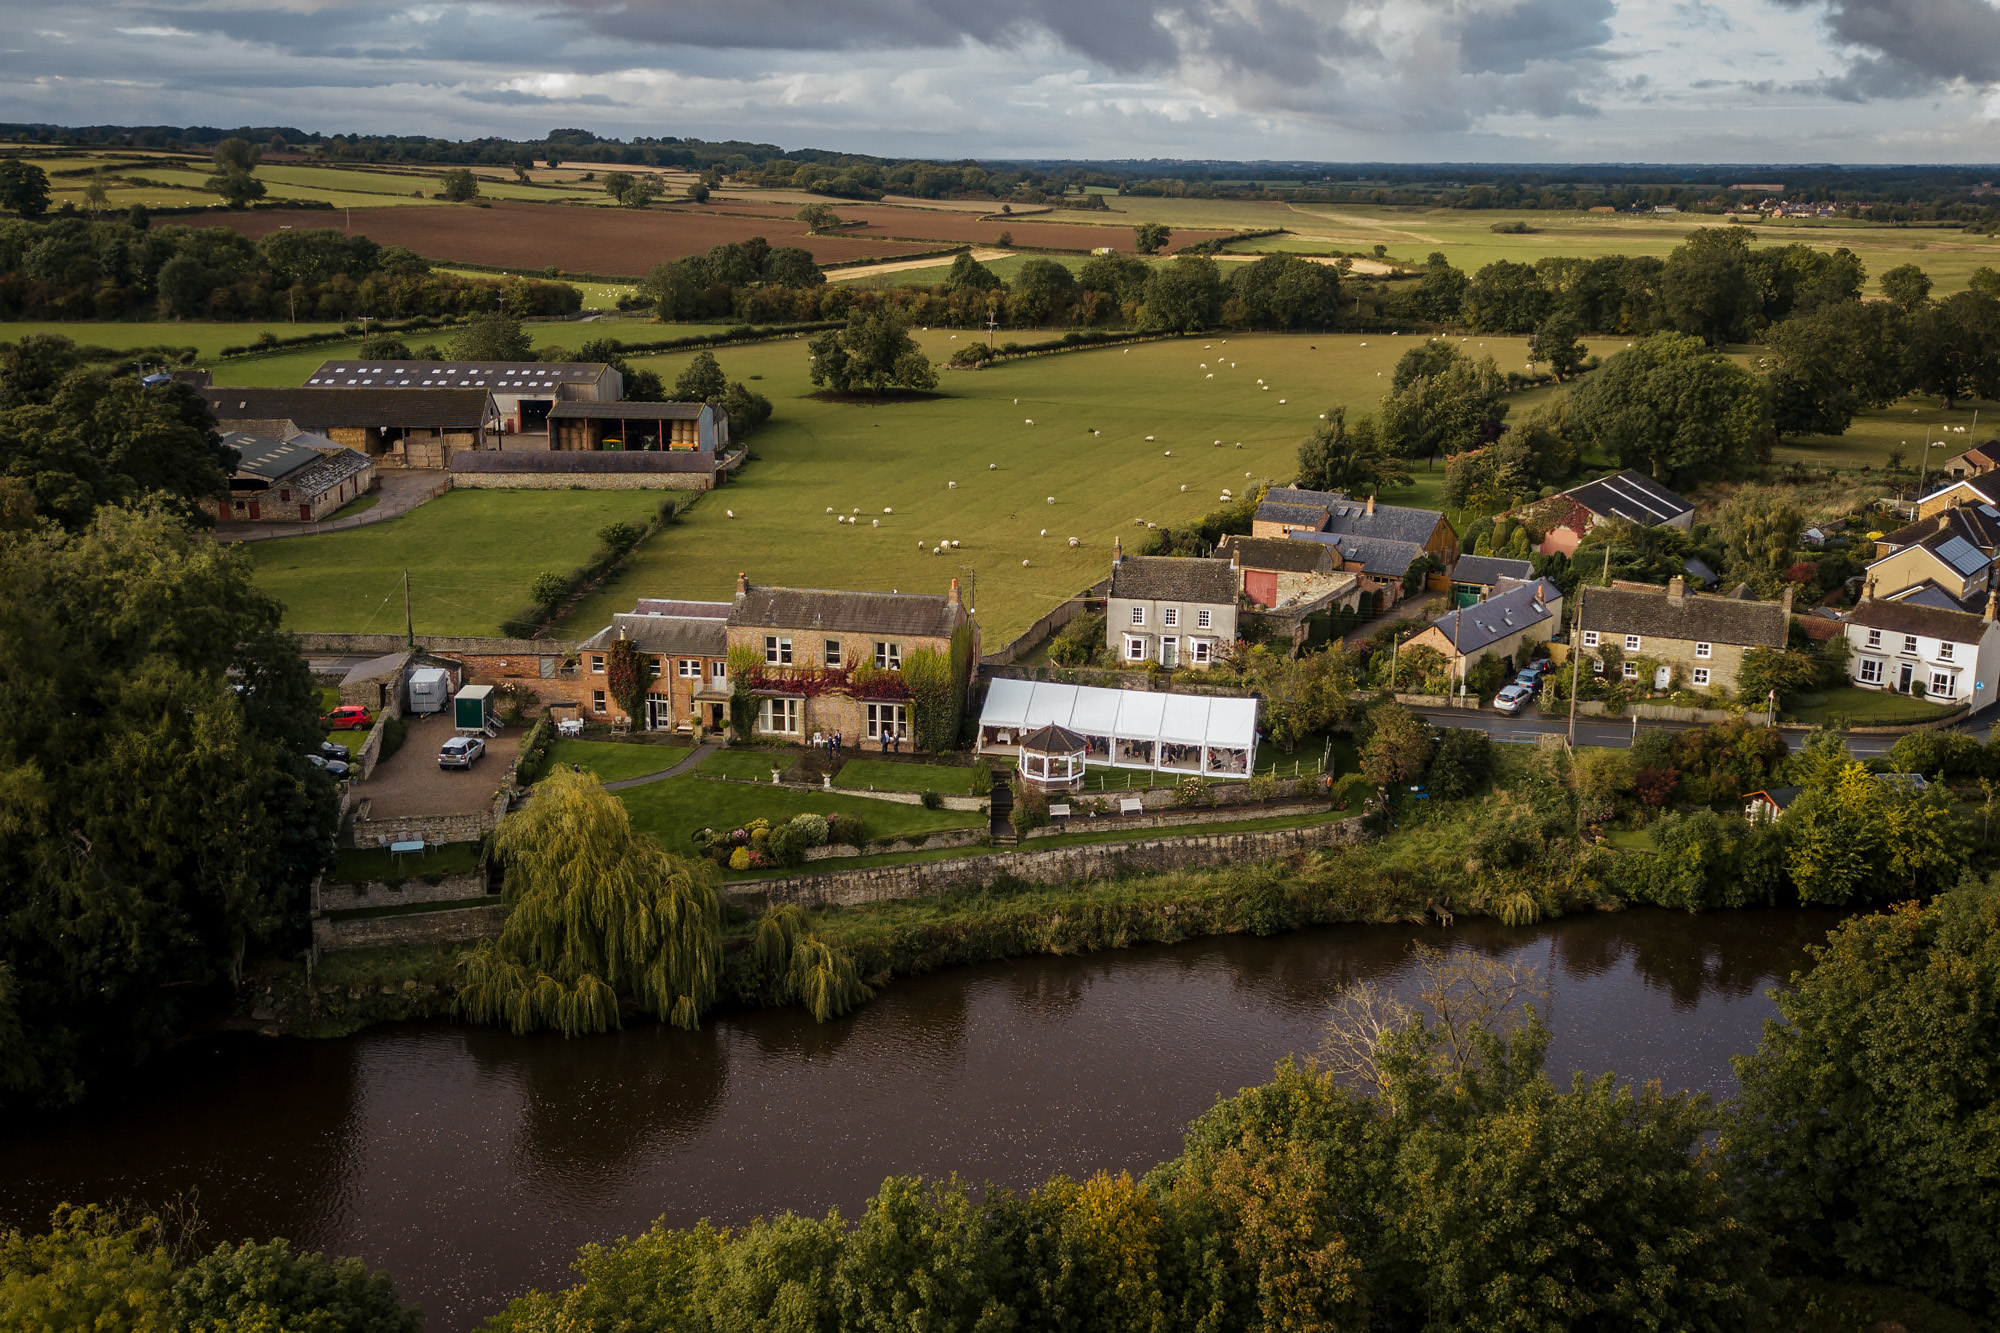 Aerial shot of Tanfield House and the surrounding fields in Yorkshire